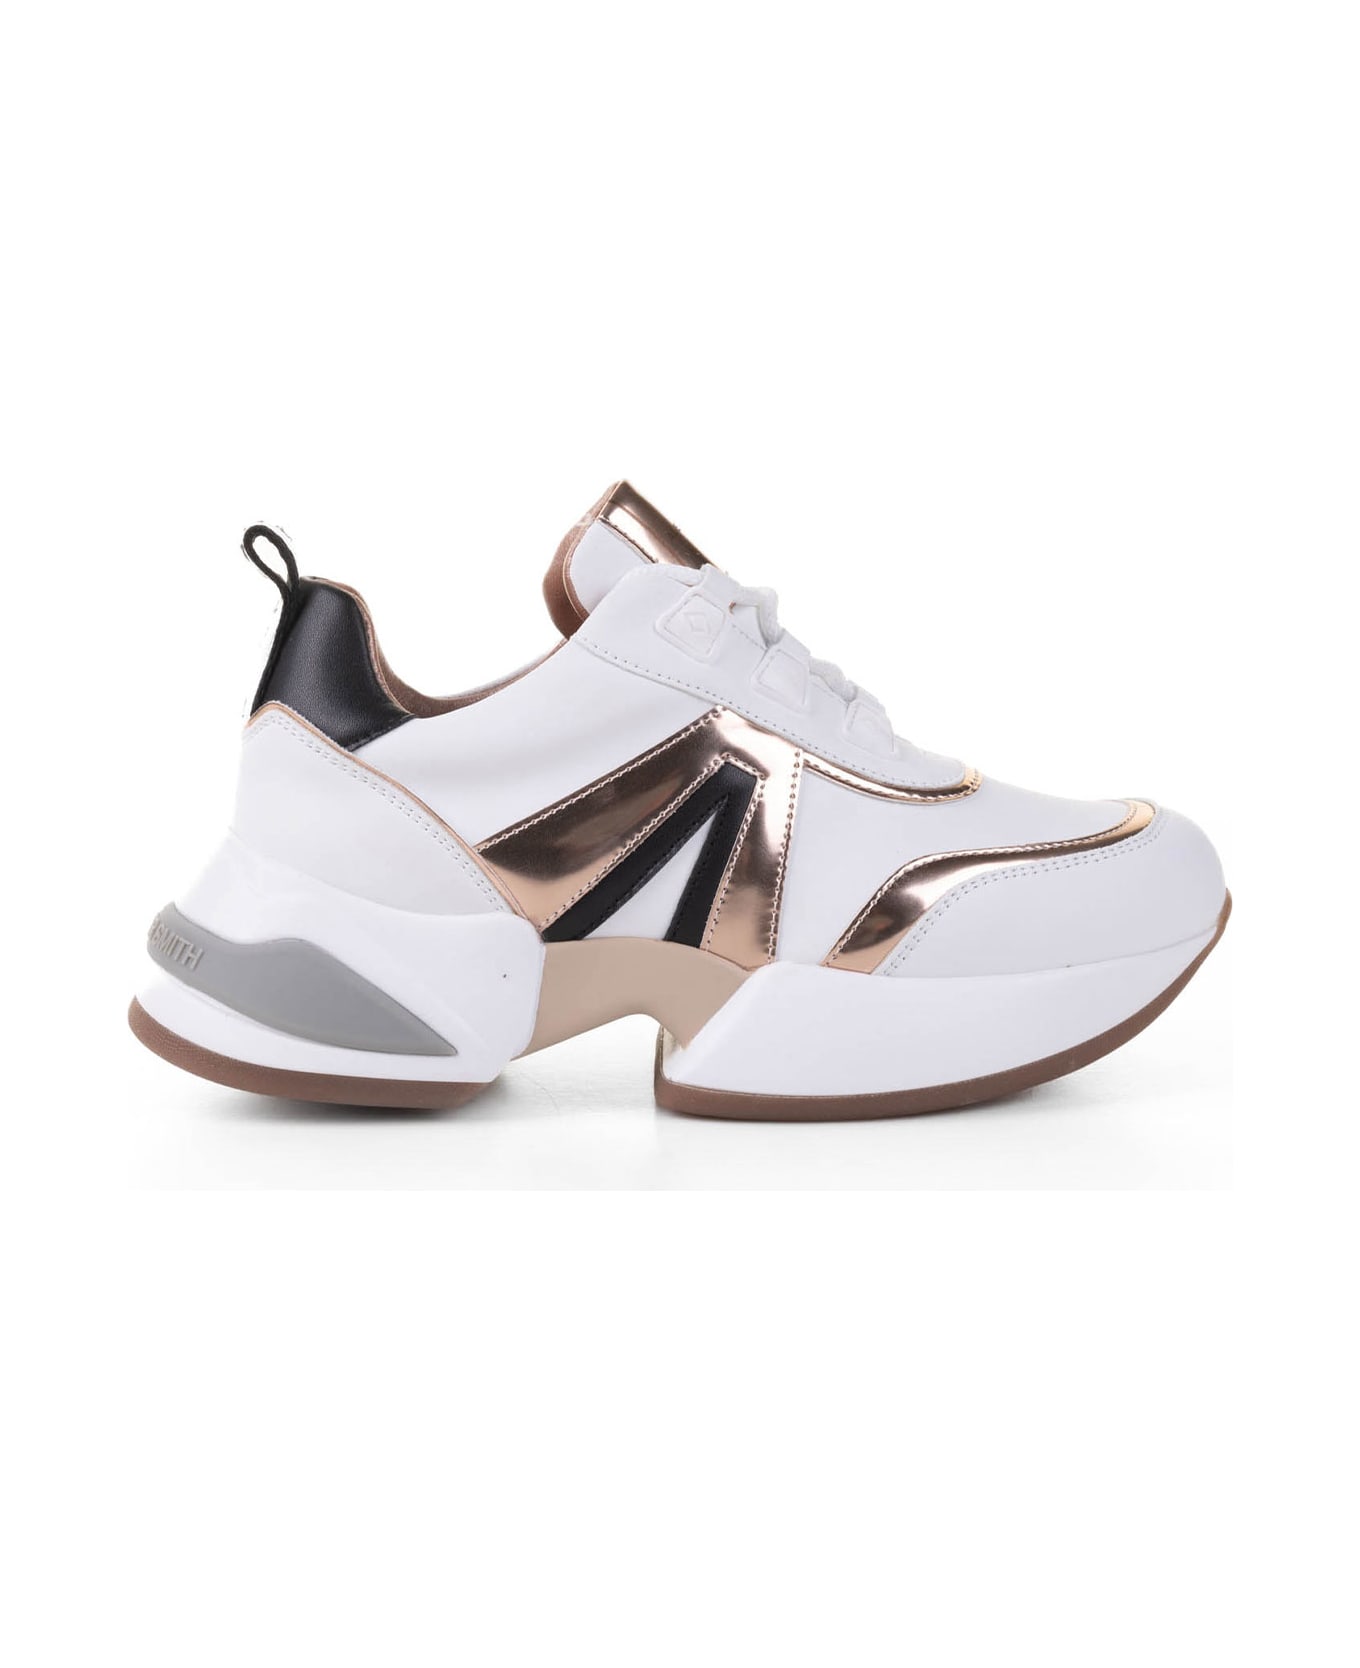 Alexander Smith London Marble Leather Sneaker - WHITE COPPER